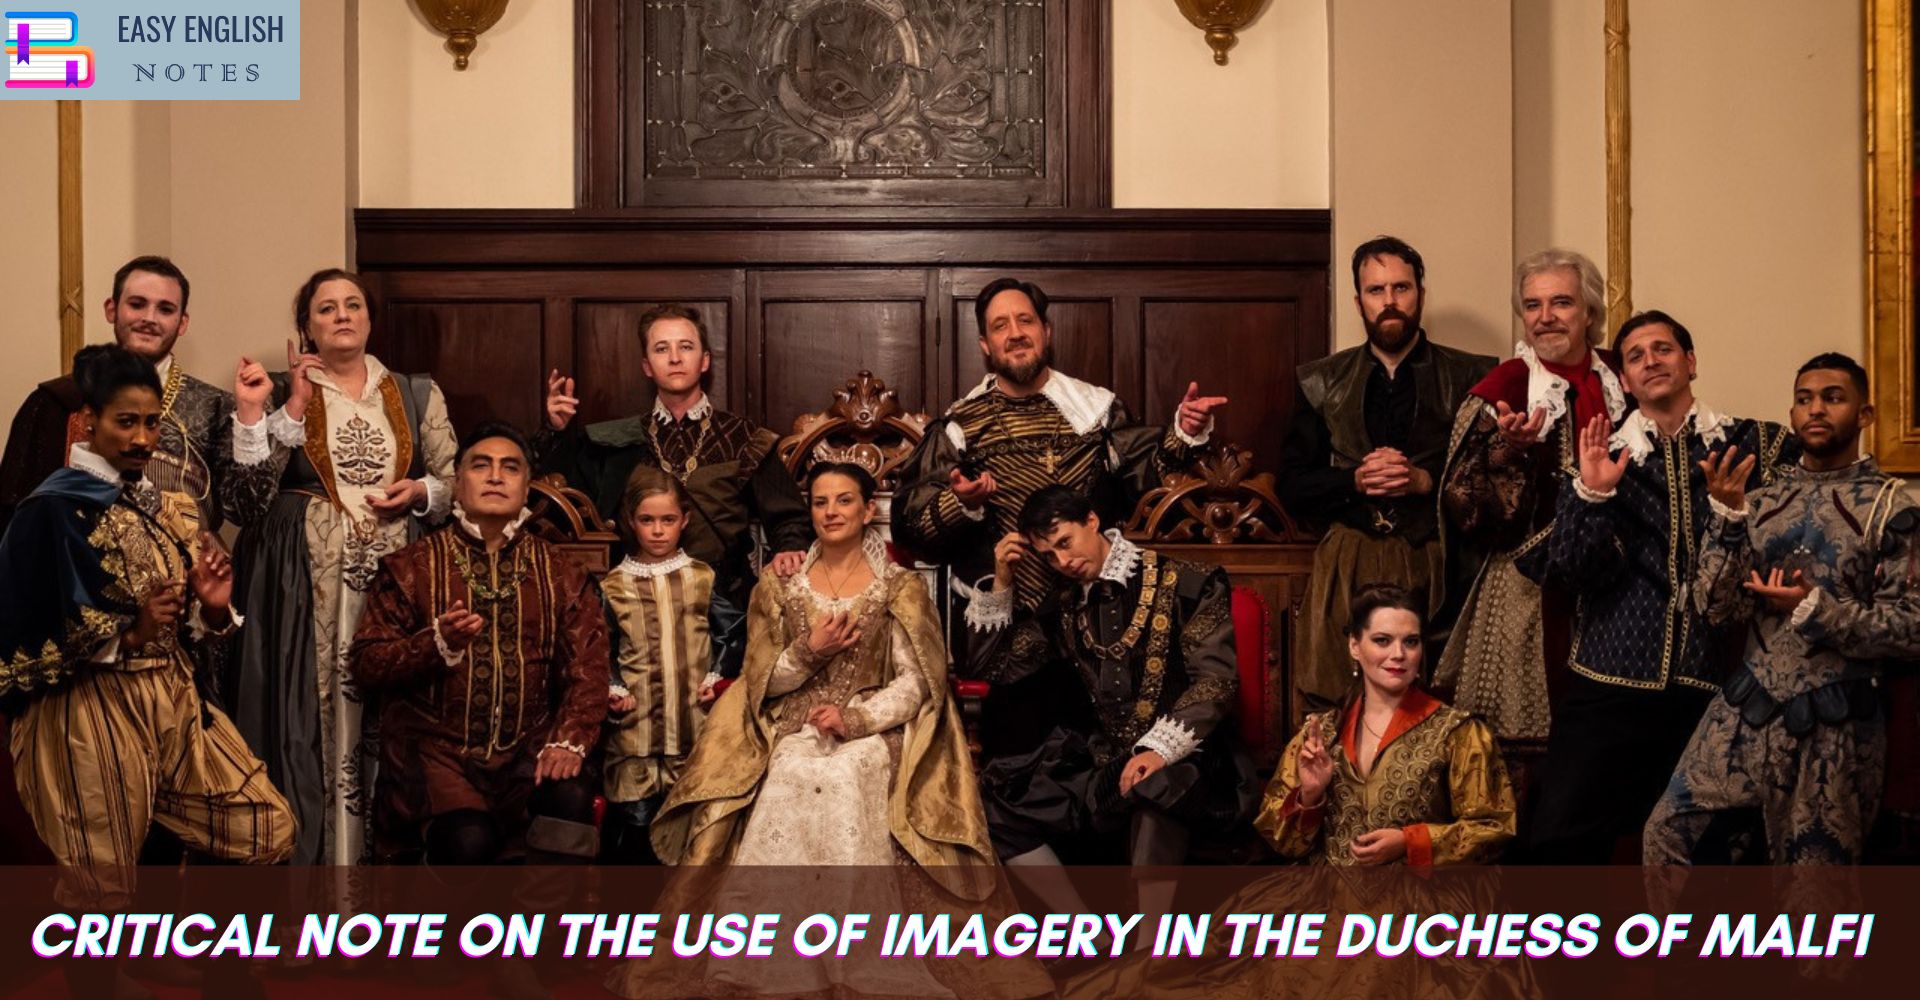 Critical Note On The Use Of Imagery In The Duchess of Malfi